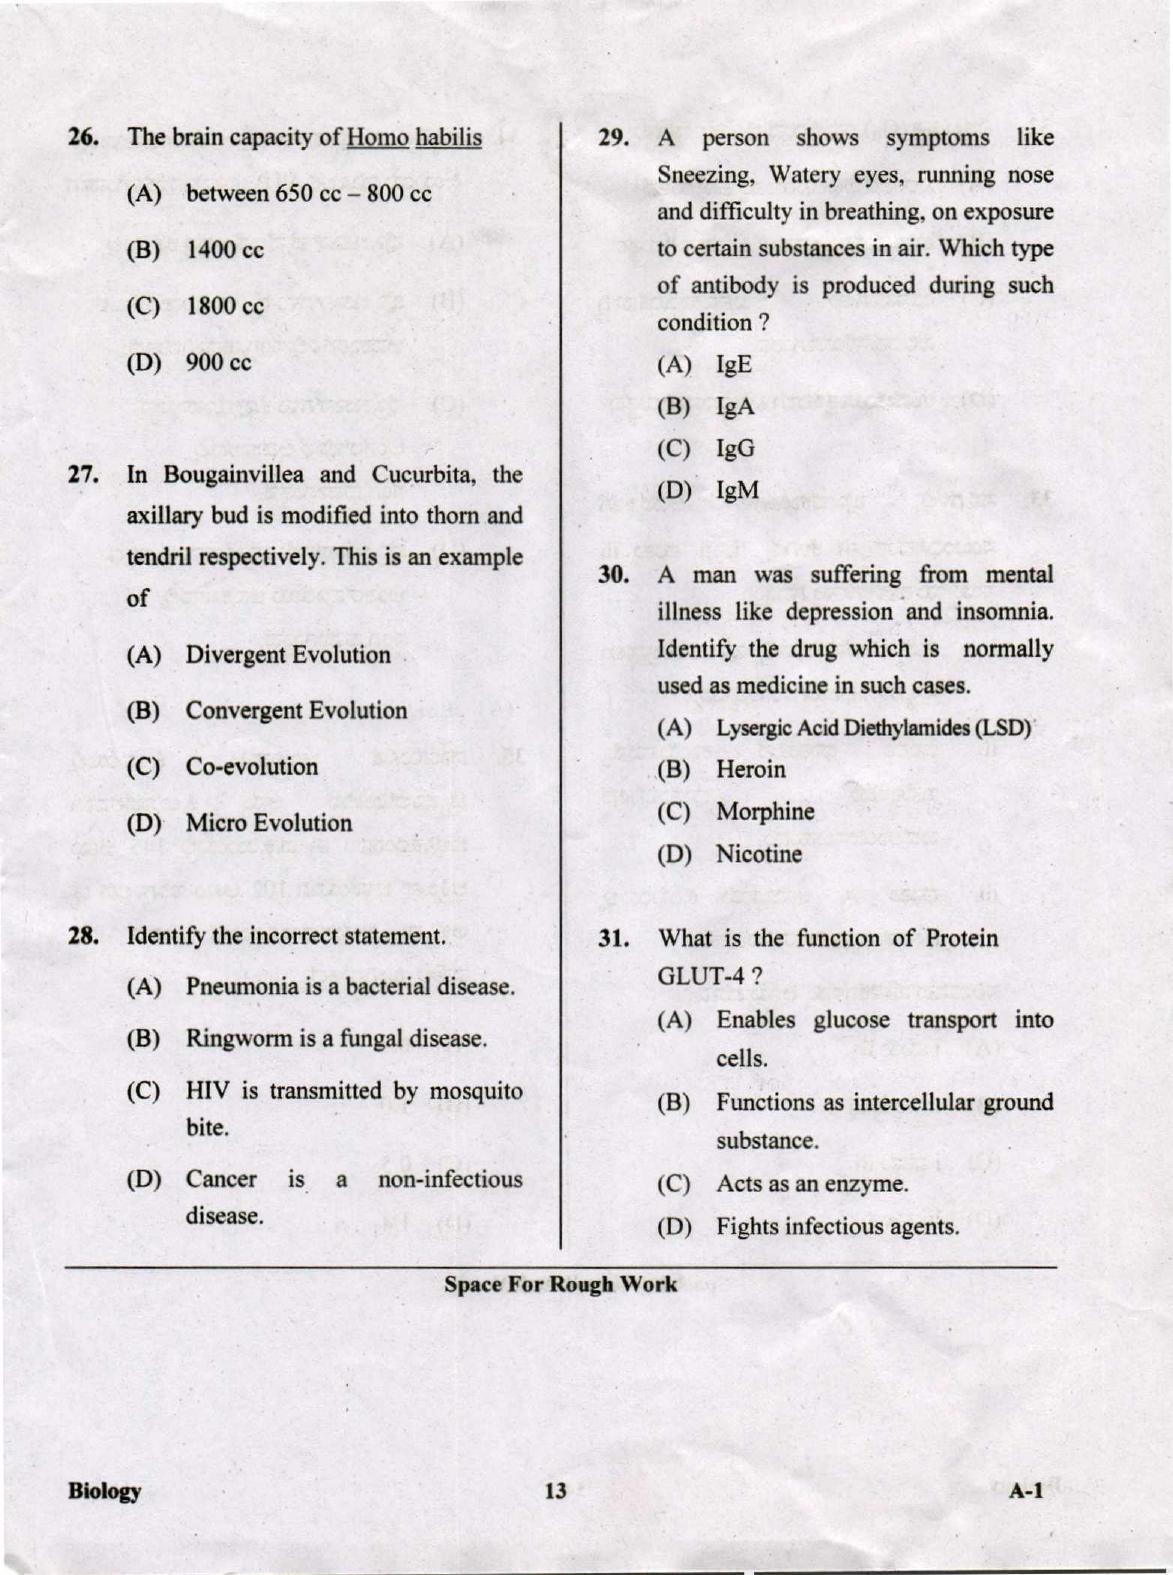 KCET Biology 2019 Question Papers - Page 13